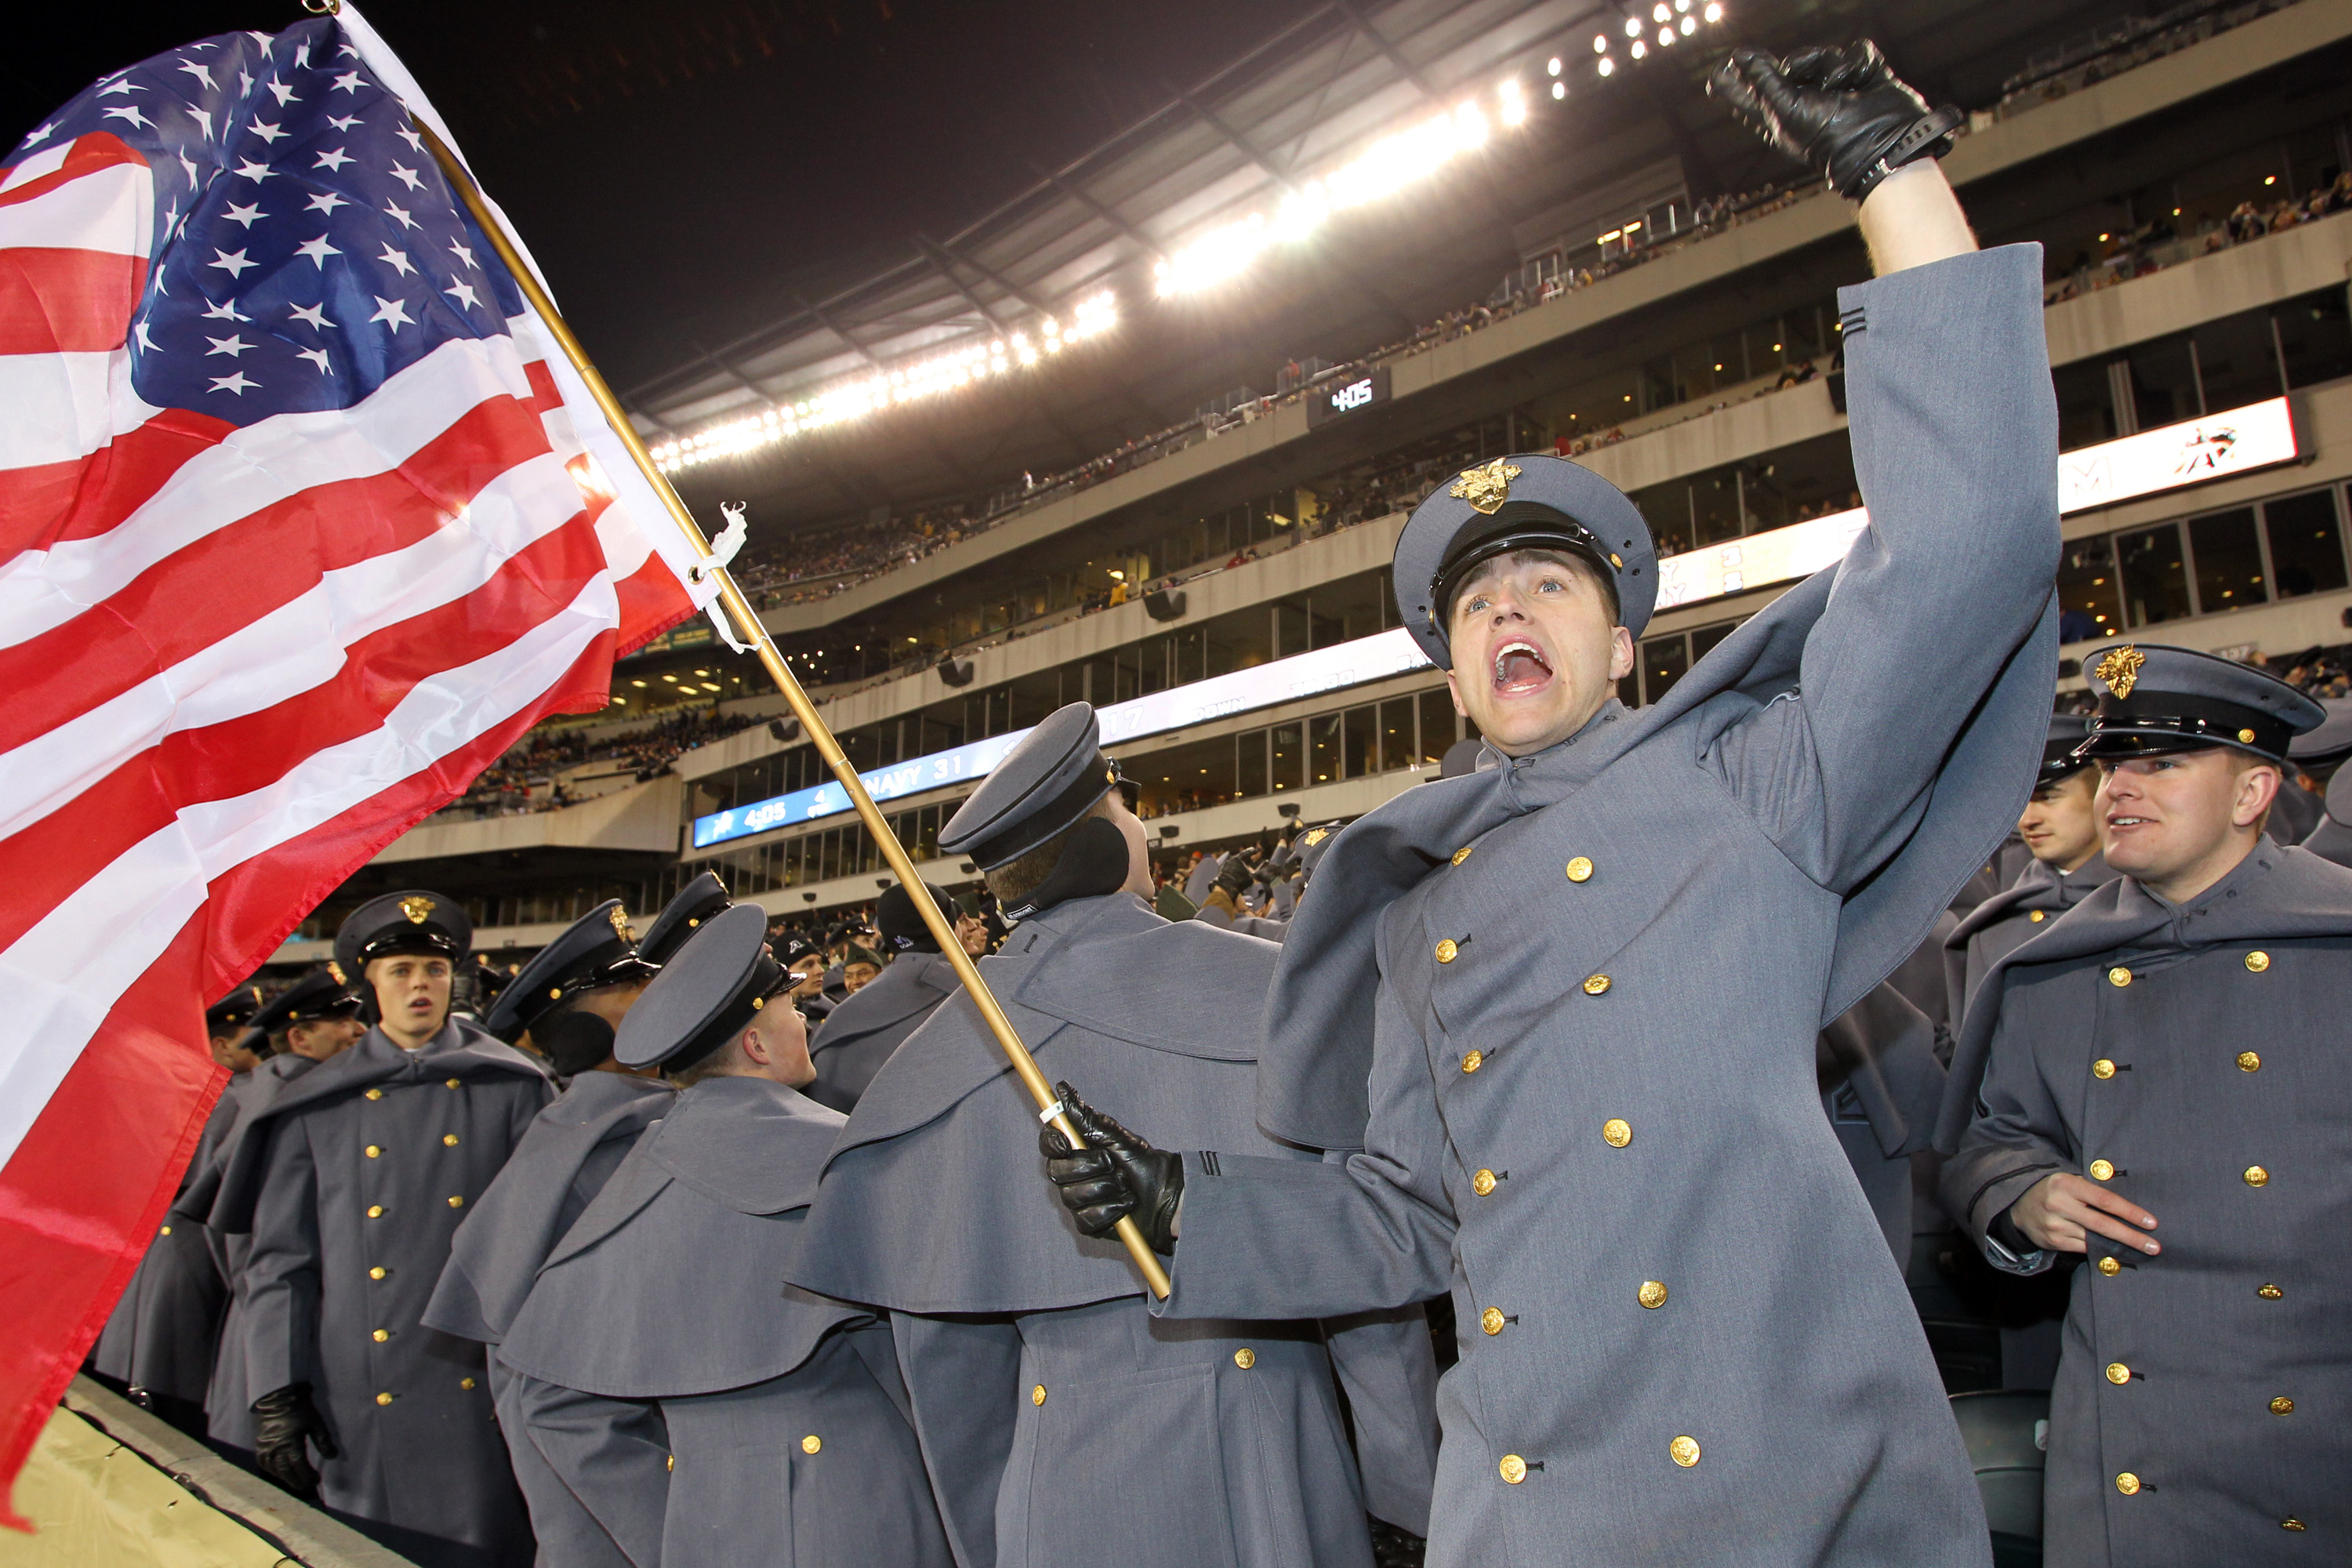 PHILADELPHIA - DECEMBER 11: An Army Cadet waves an American flag and cheers during a game between the Navy Midshipmen and the Army Black Knights on December 11, 2010 at Lincoln Financial Field in Philadelphia, Pennsylvania. The Midshipmen won 31-17. (Phot